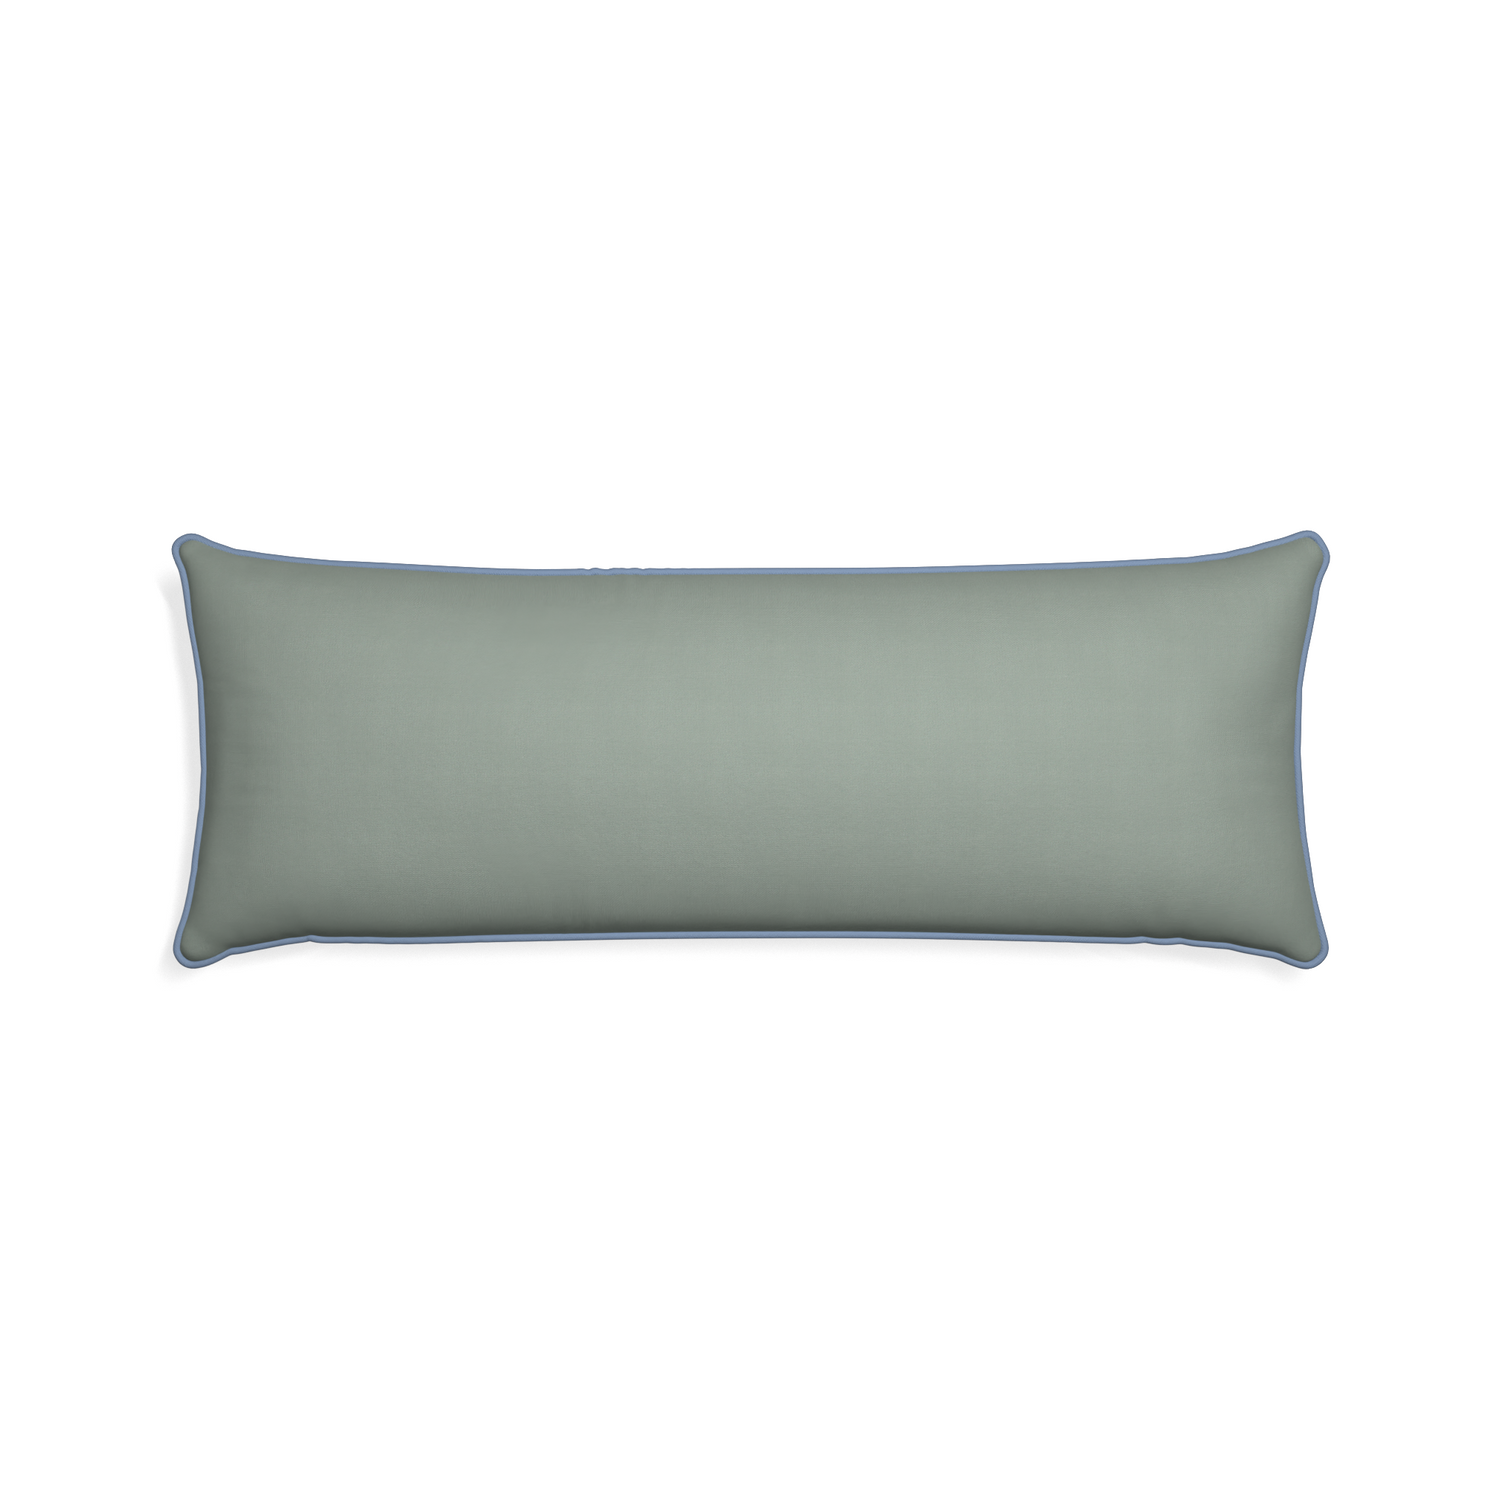 Xl-lumbar sage custom pillow with sky piping on white background